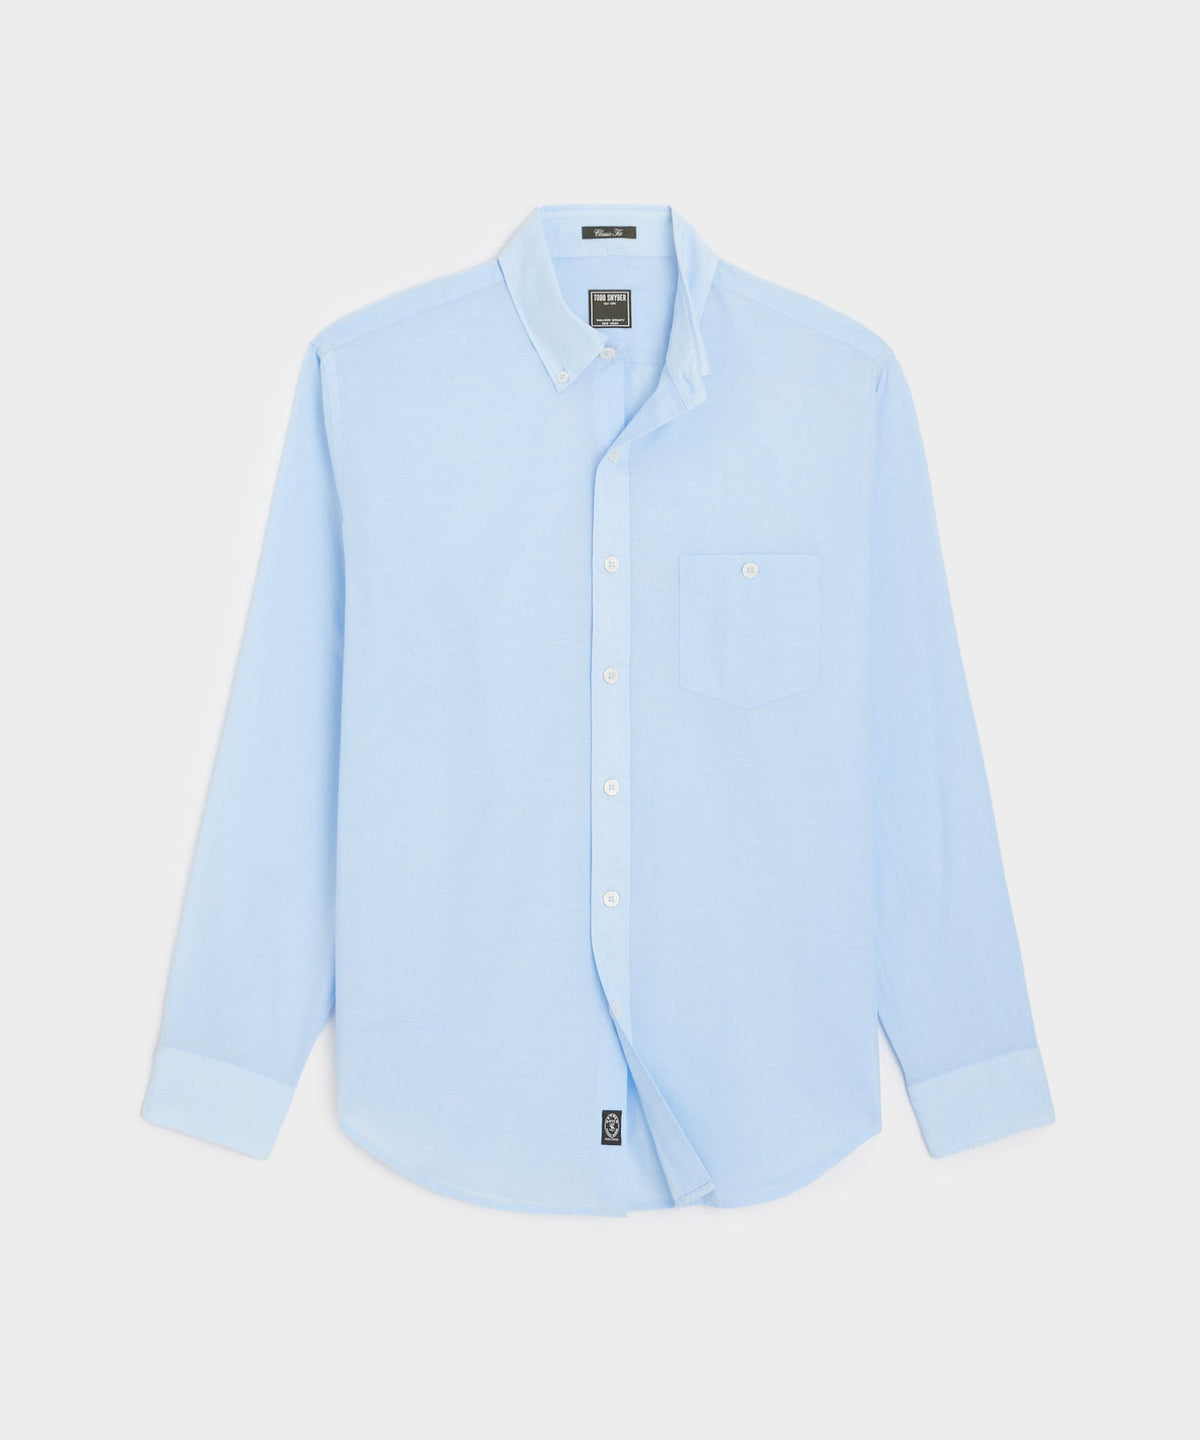 Classic Fit Summerweight Favorite Shirt in Blue